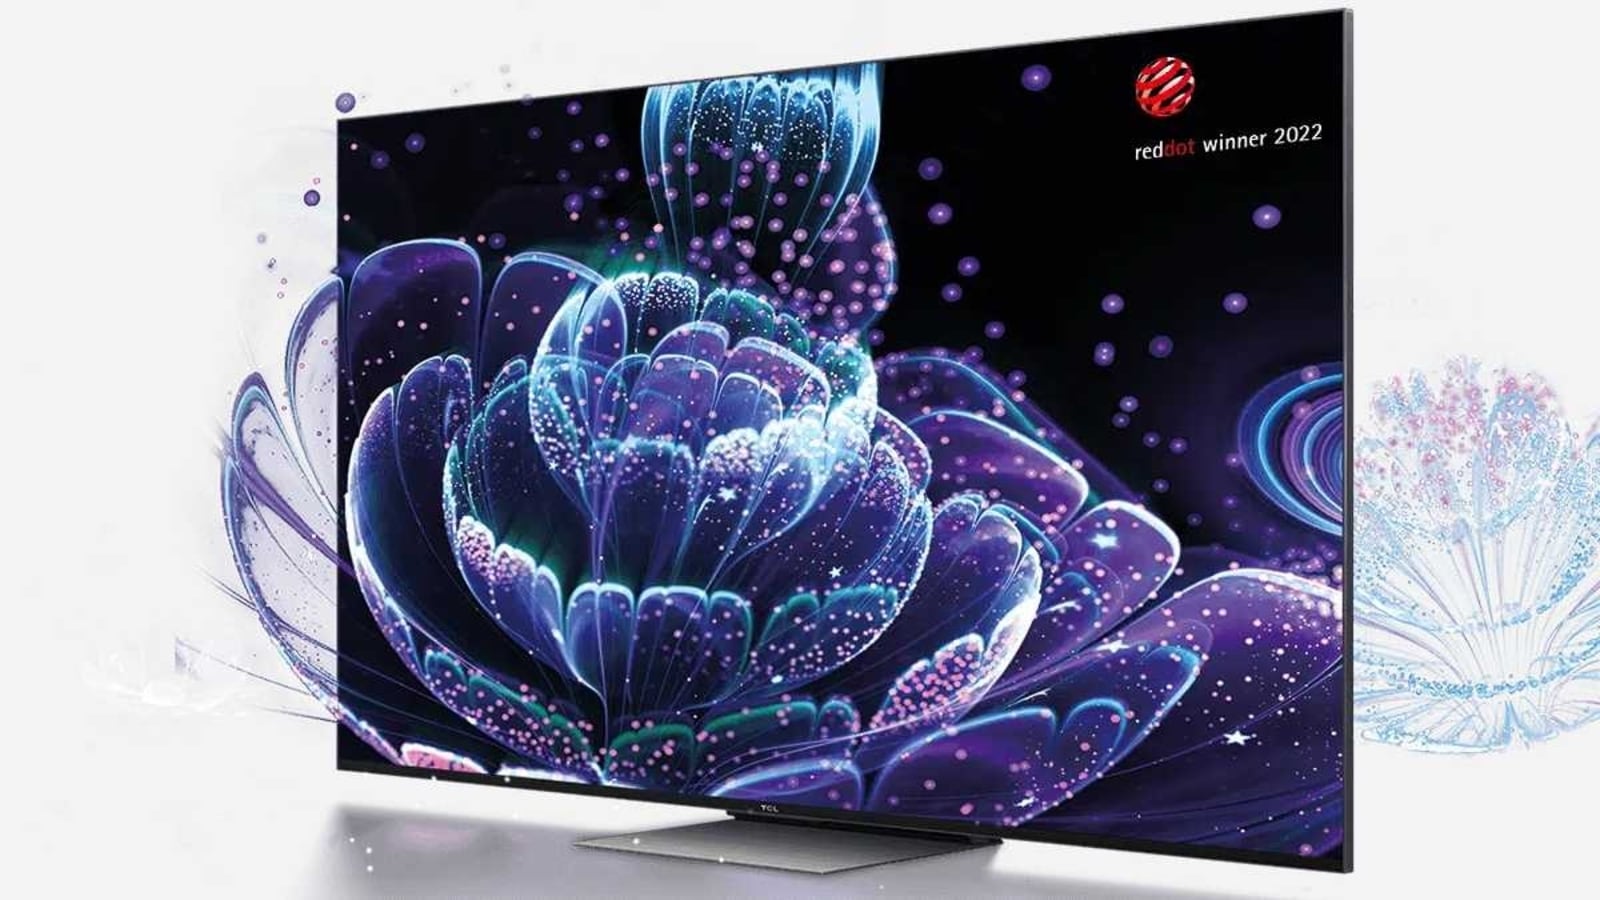 TCL launches 4K Mini LED TV with 144Hz VR and Google TV in India